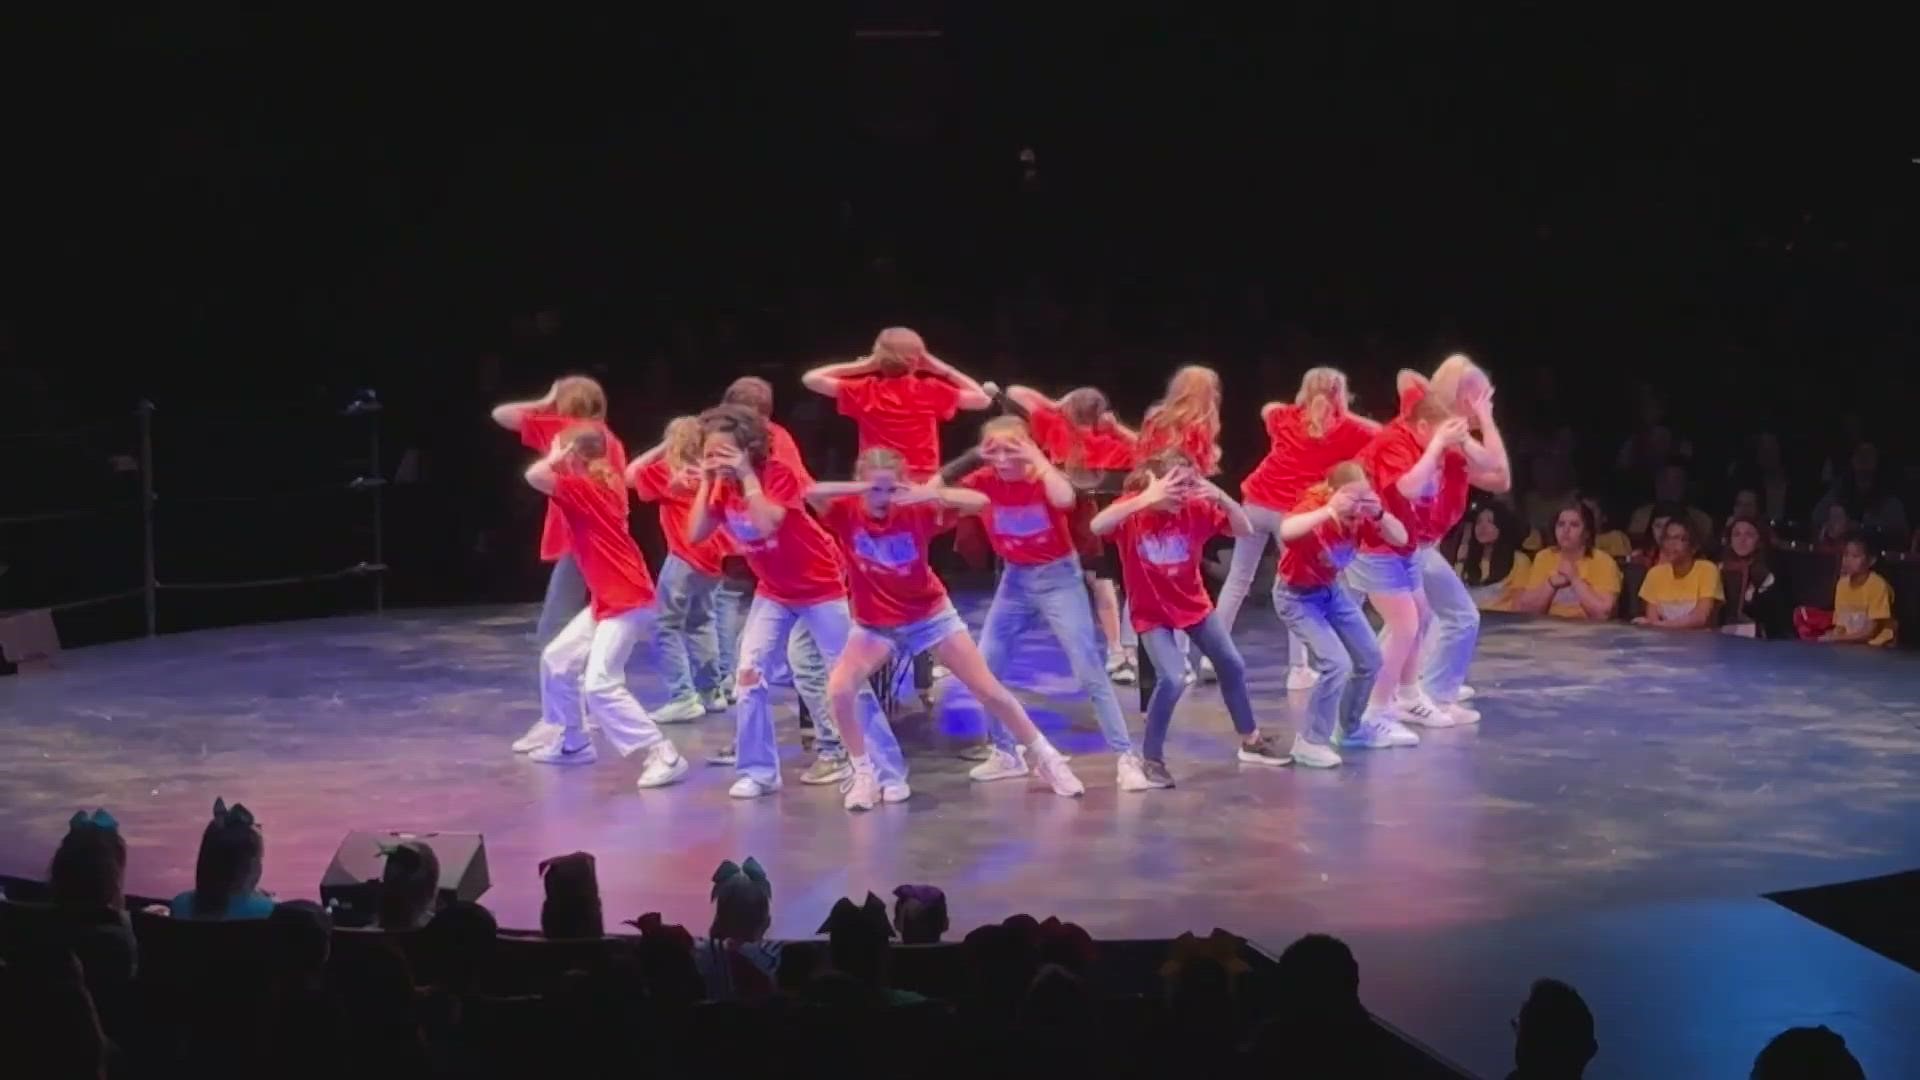 About 1,500 kids from all over the world compete in a musical theater competition.